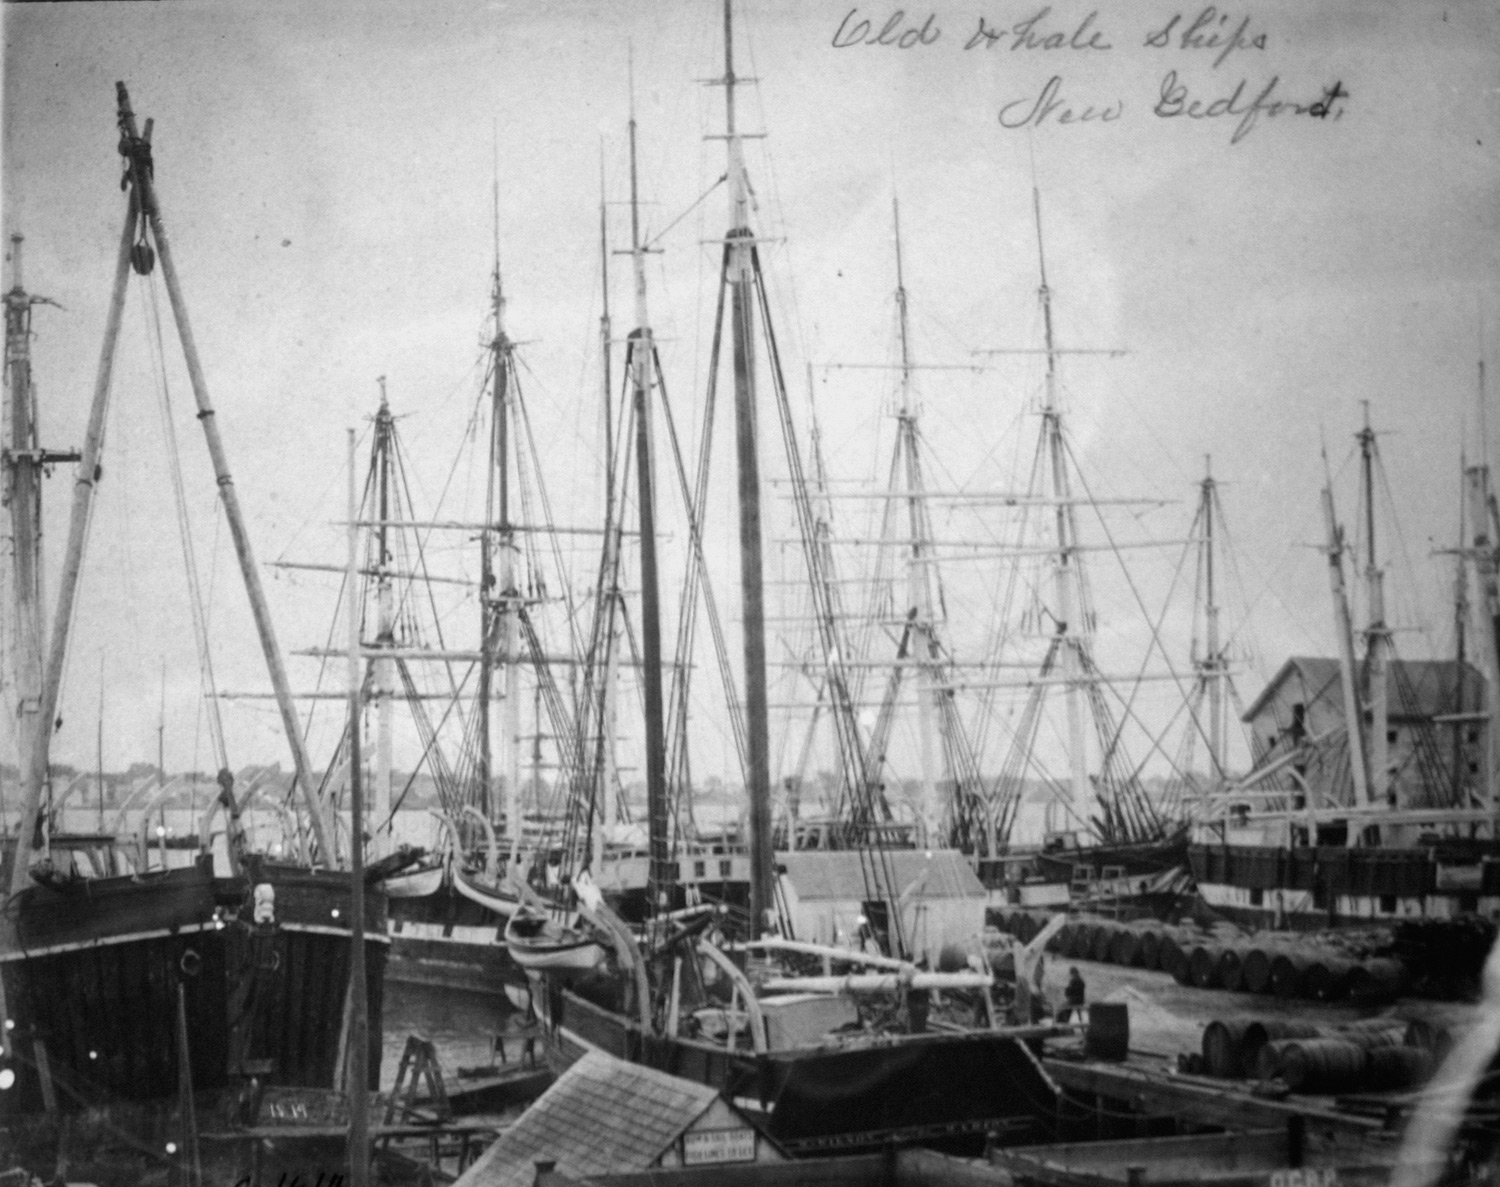 What are some historical facts about New Bedford?